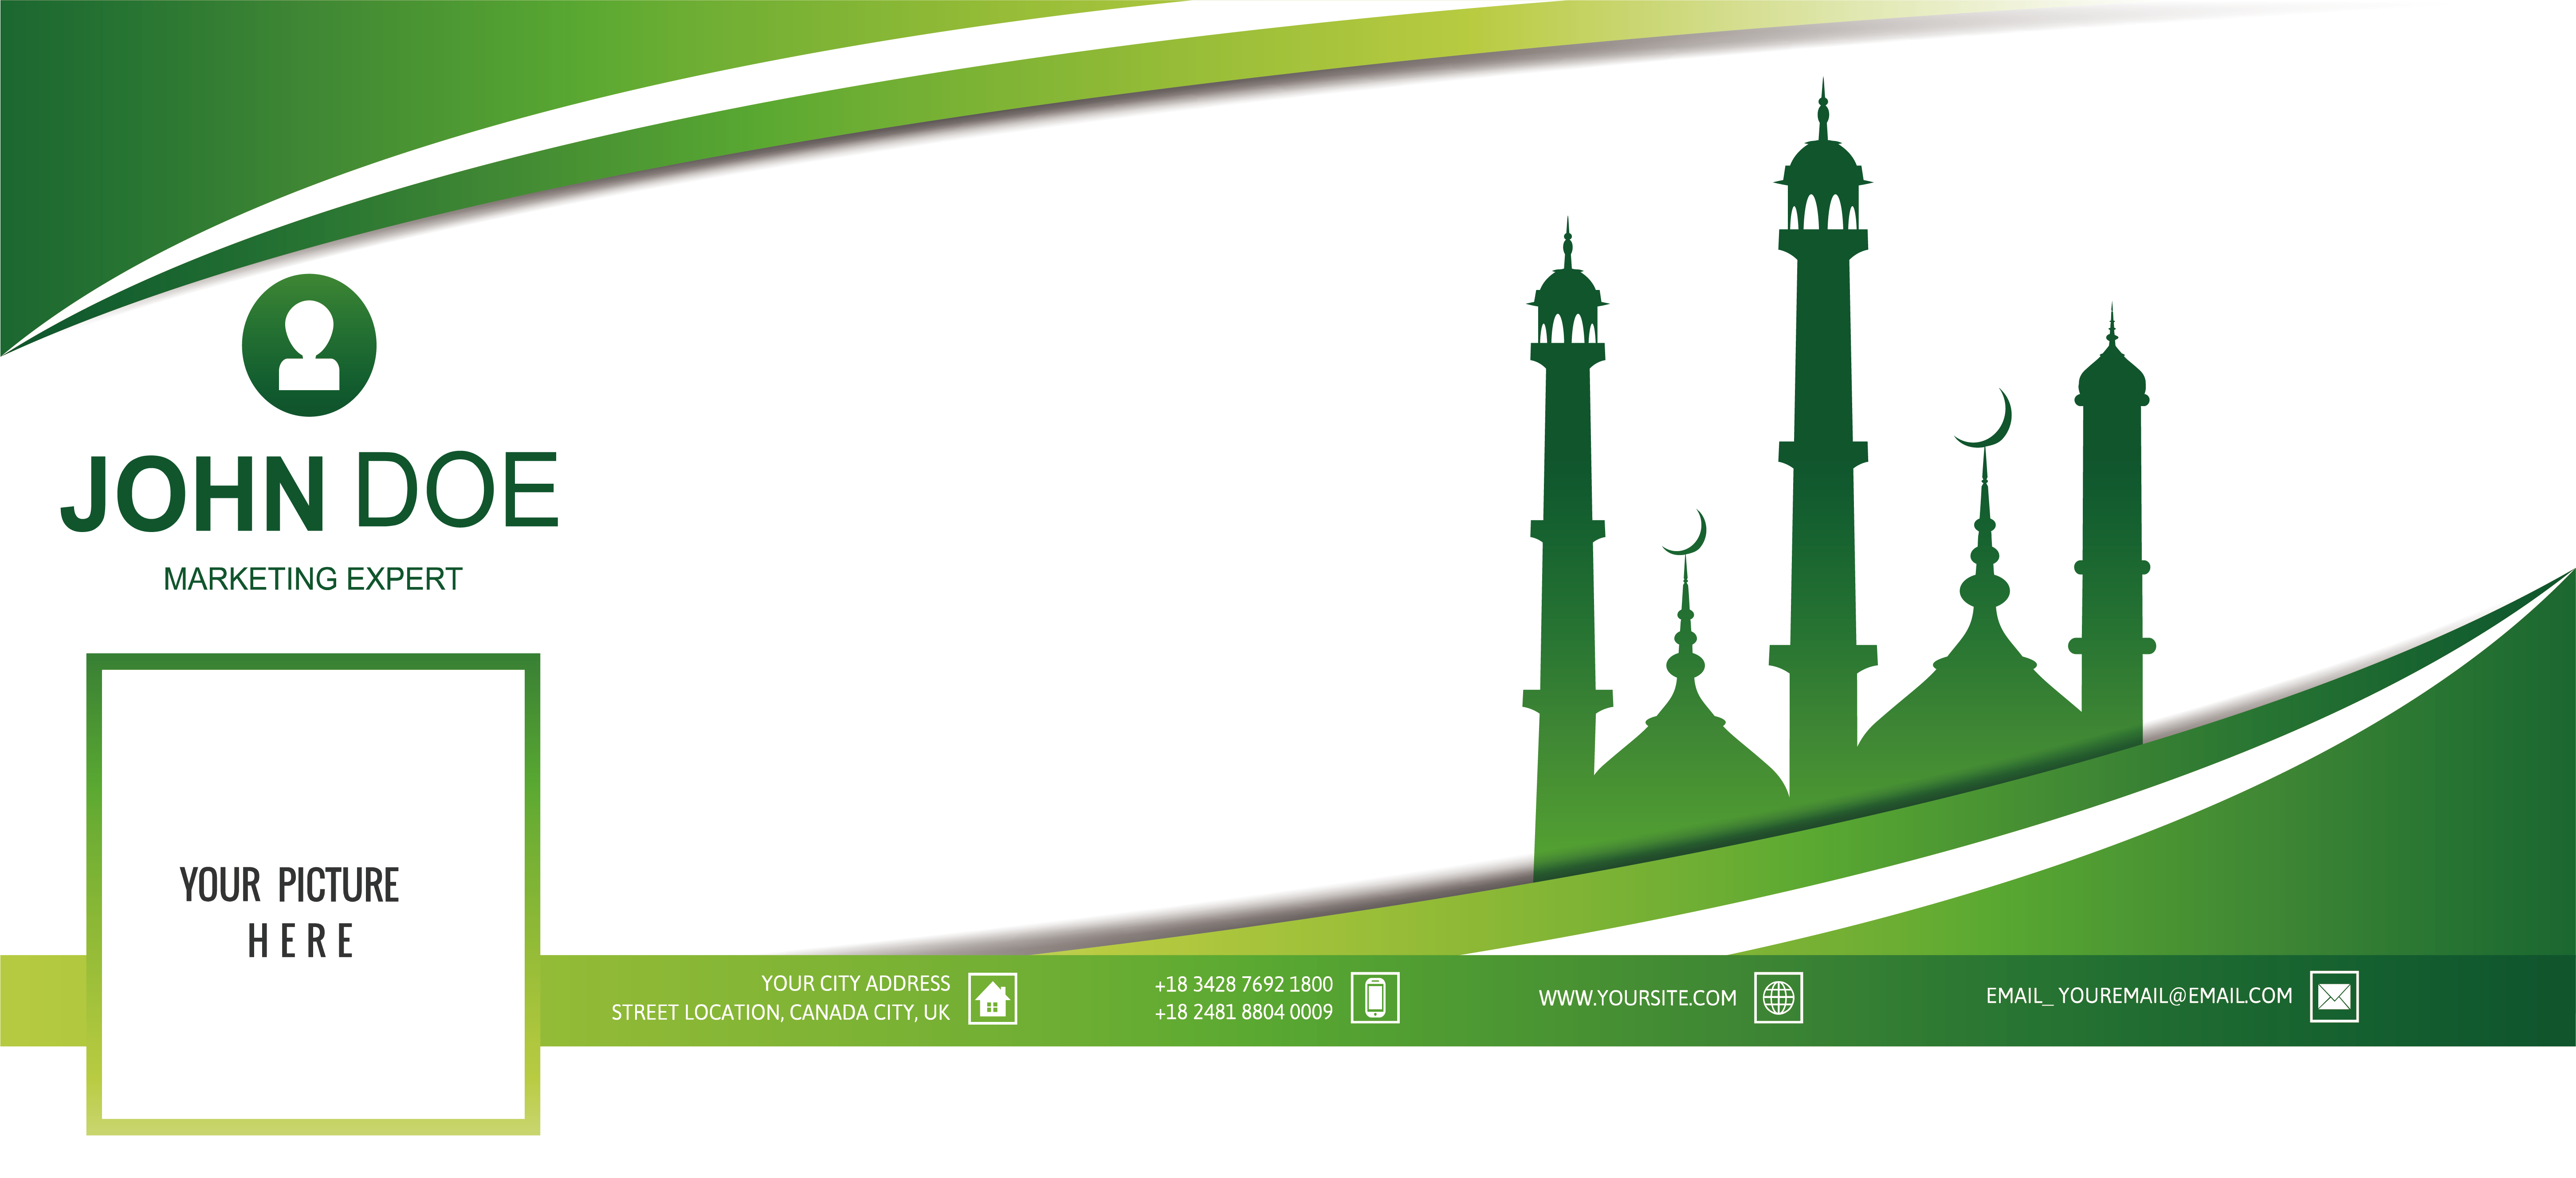 Church Cover Uloom Euclidean Vector Facebook Darul PNG Image